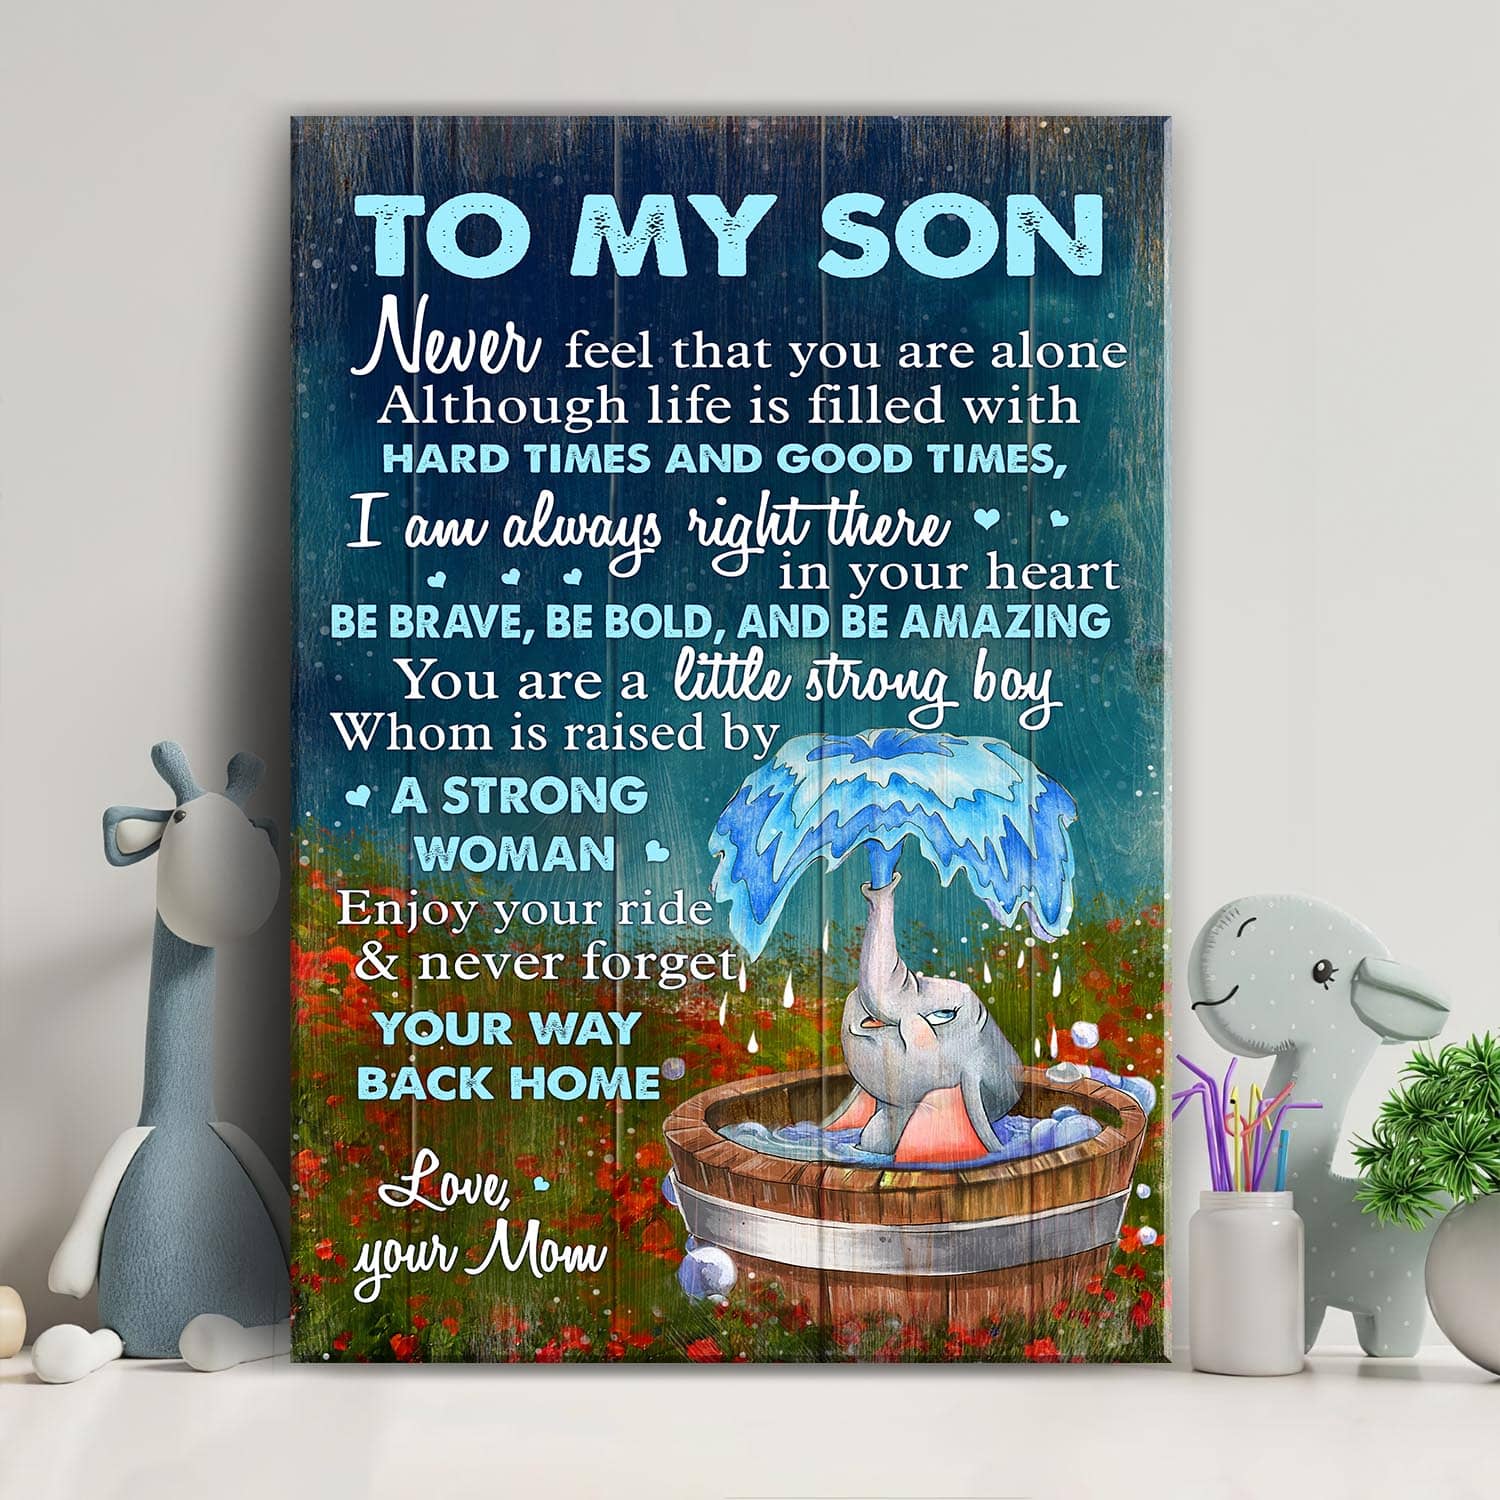 Mom to son, Baby Elephant, Flower garden, I'm always in your heart - Family Portrait Canvas Prints, Wall Art